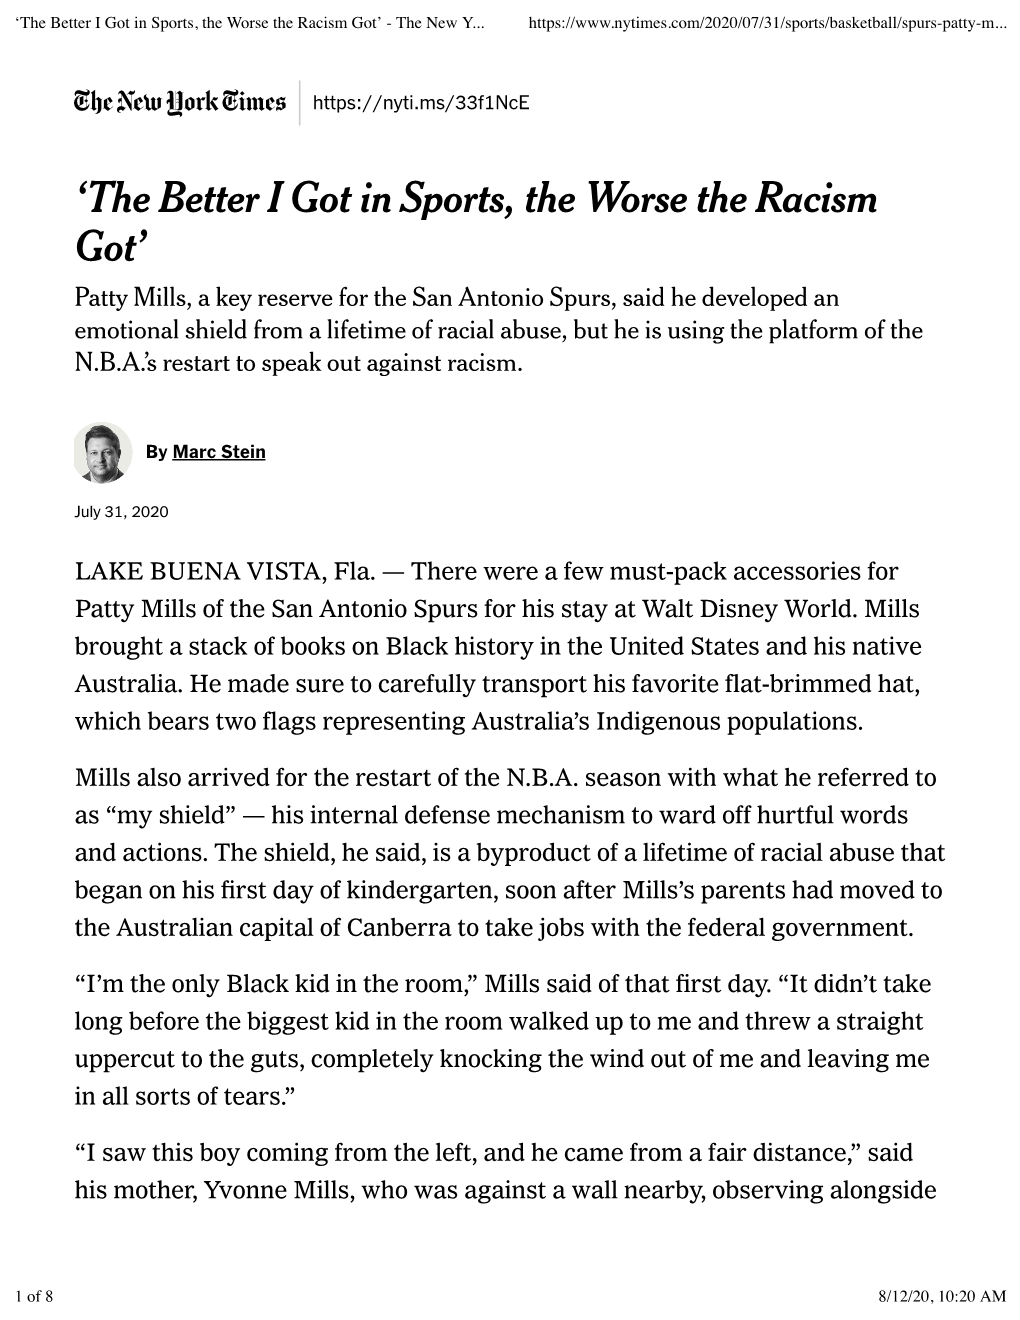 'The Better I Got in Sports, the Worse the Racism Got'